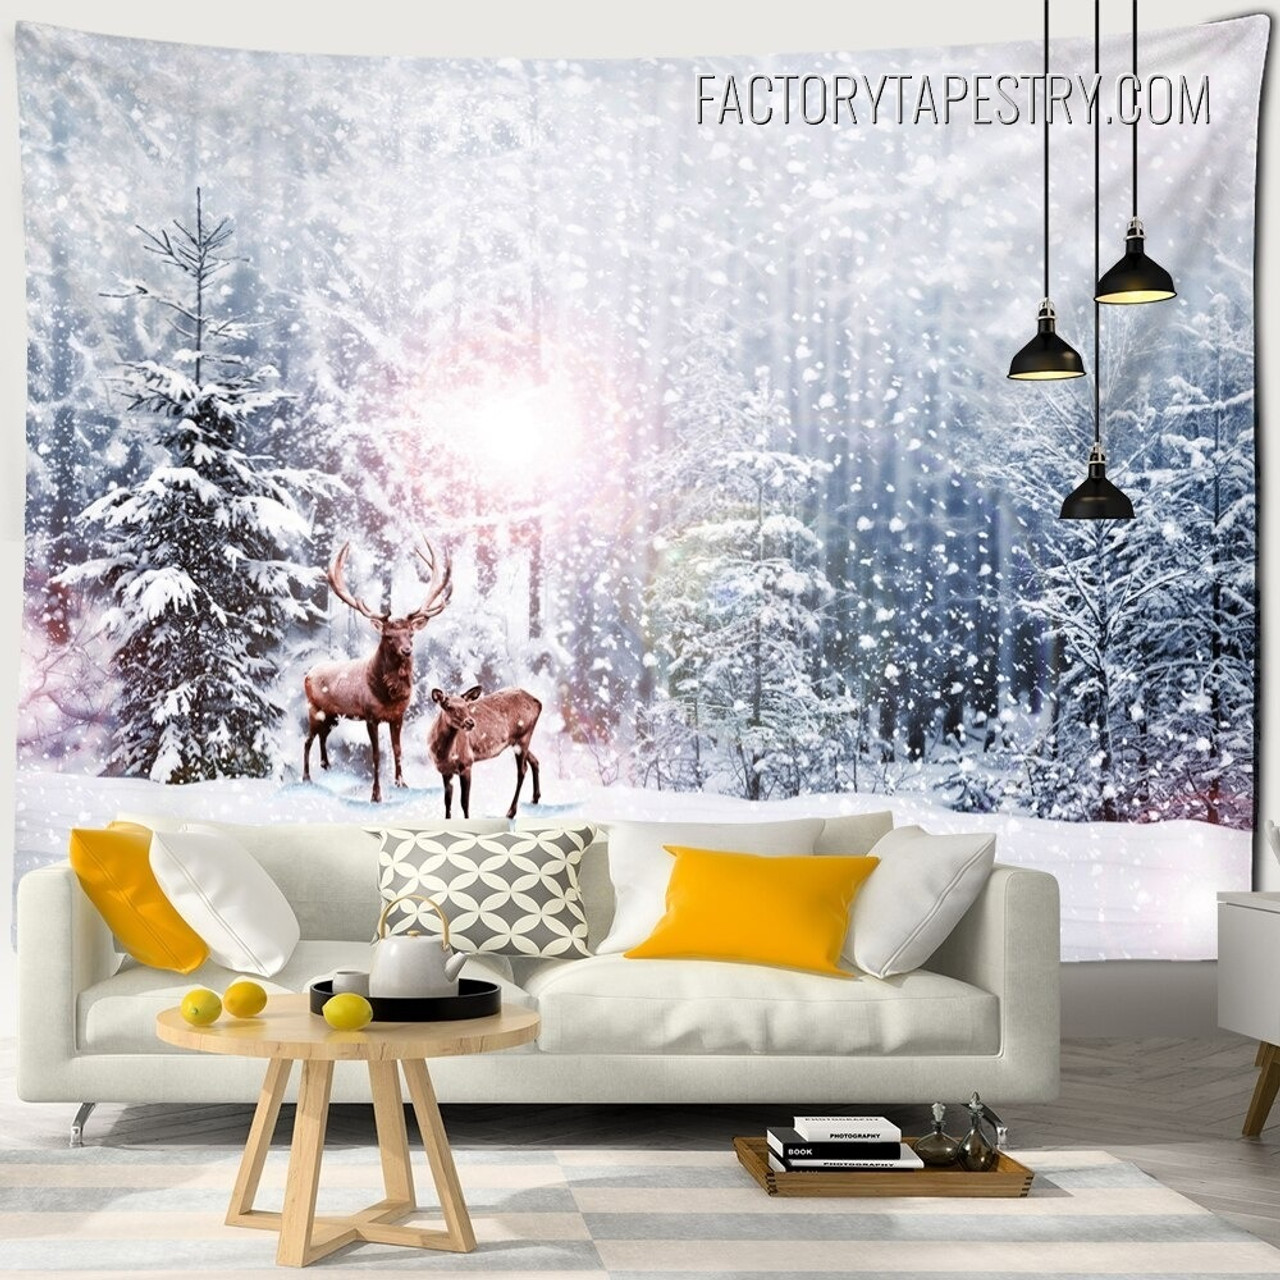 Snow Forest Animal Nature Landscape Modern Wall Art Tapestry for Living Room Decoration